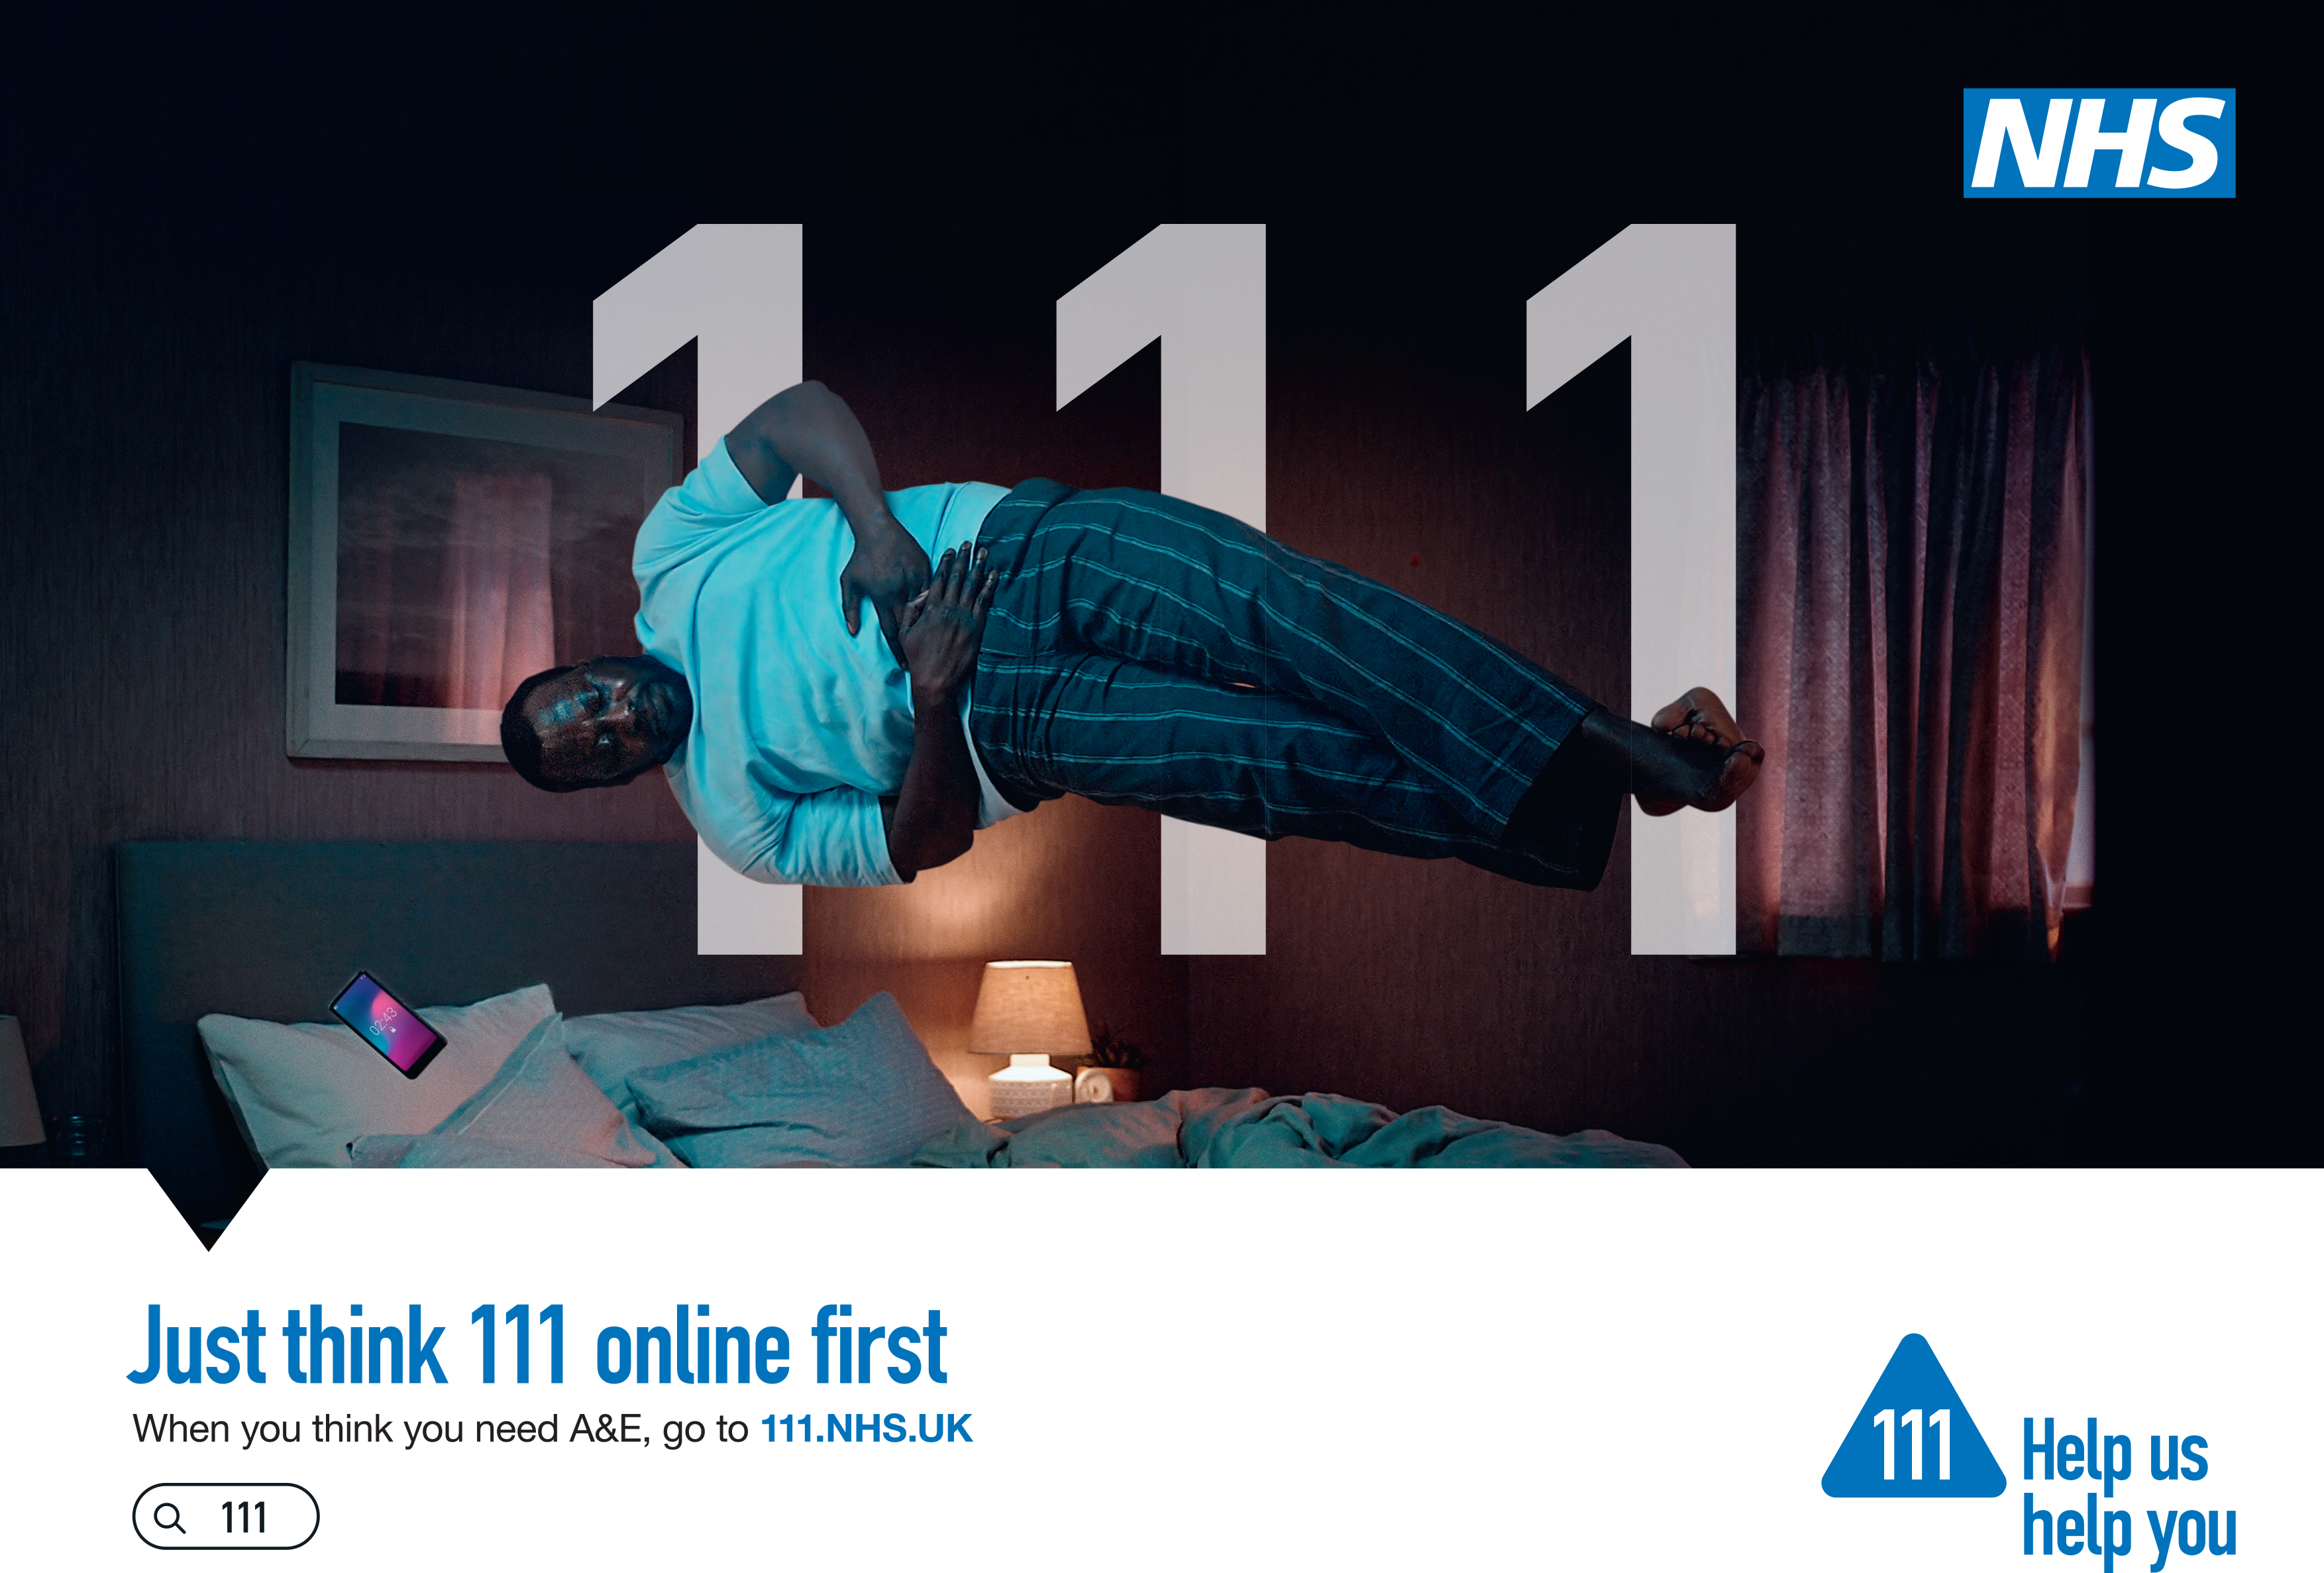 When you think you need A&E, contact NHS 111 online first